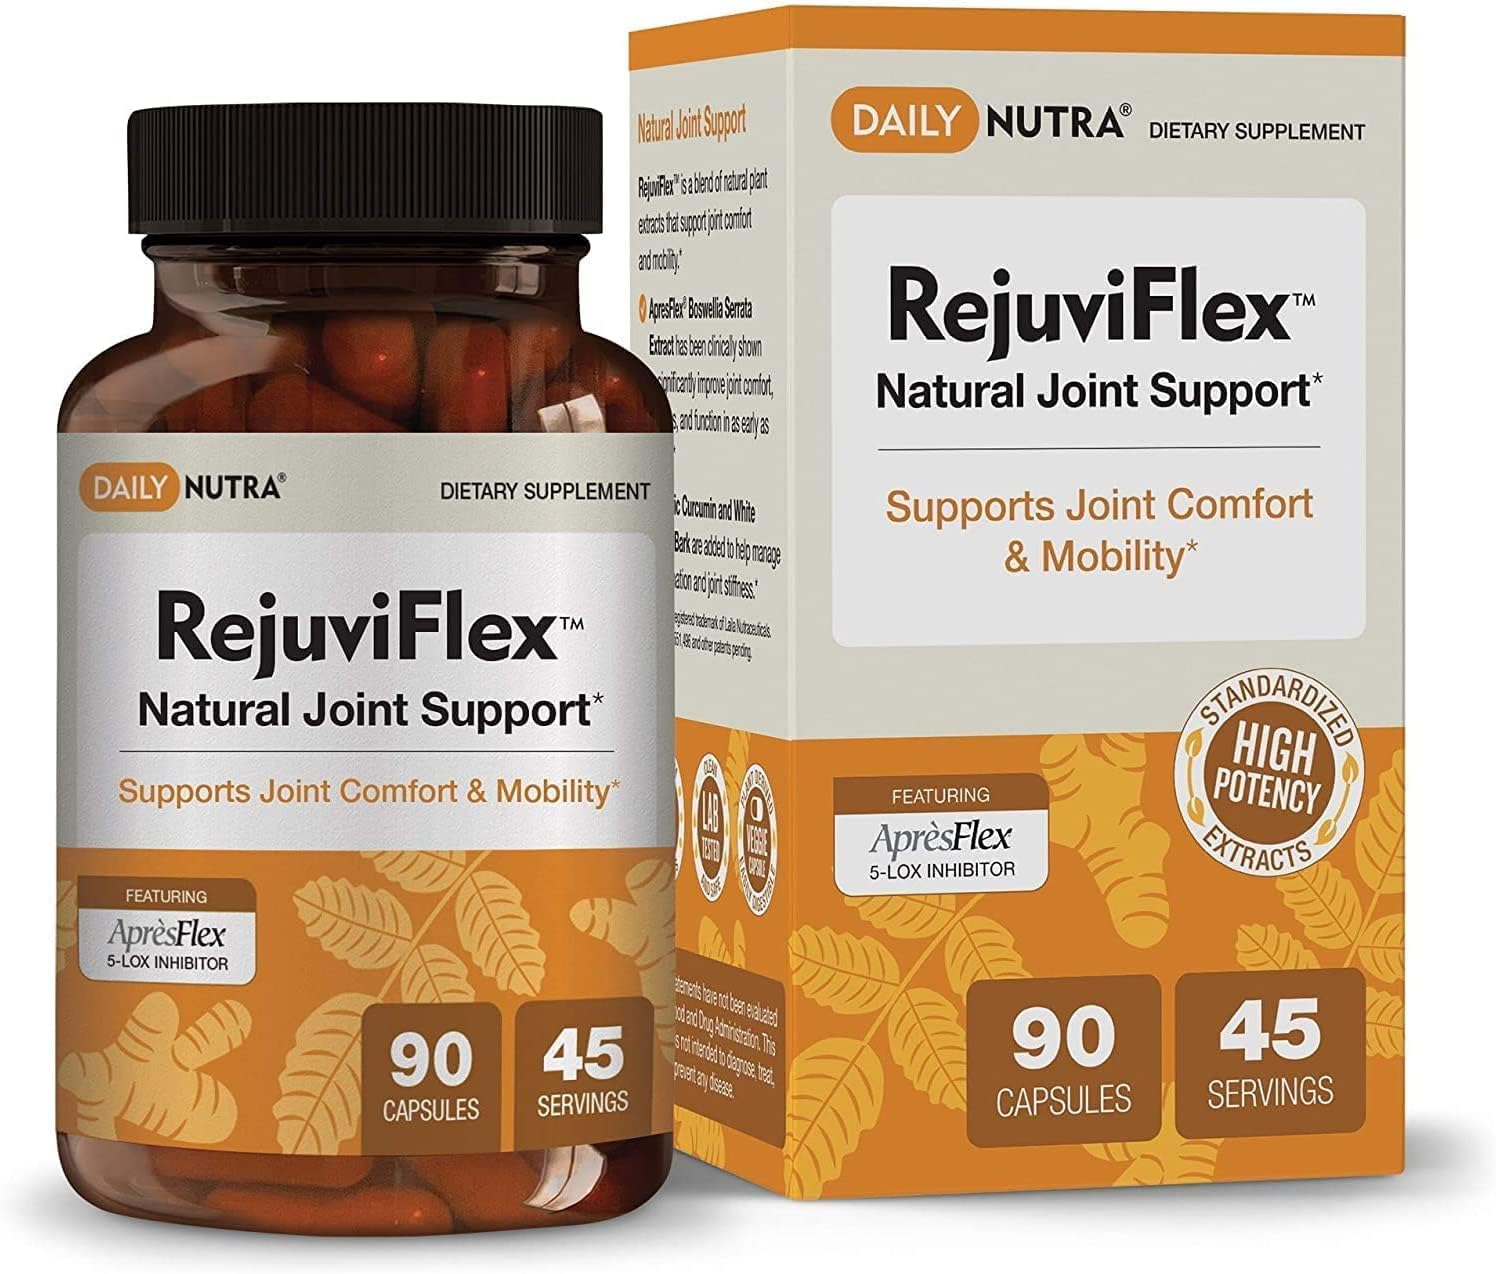 DailyNutra RejuviFlex - Natural Joint Supplement w/ApresFlex Boswellia AKBA, Turmeric Curcumin, Piperine & White Willow Bark - for Function of Hands, Knees, Overall Joint Health (90 Capsules)